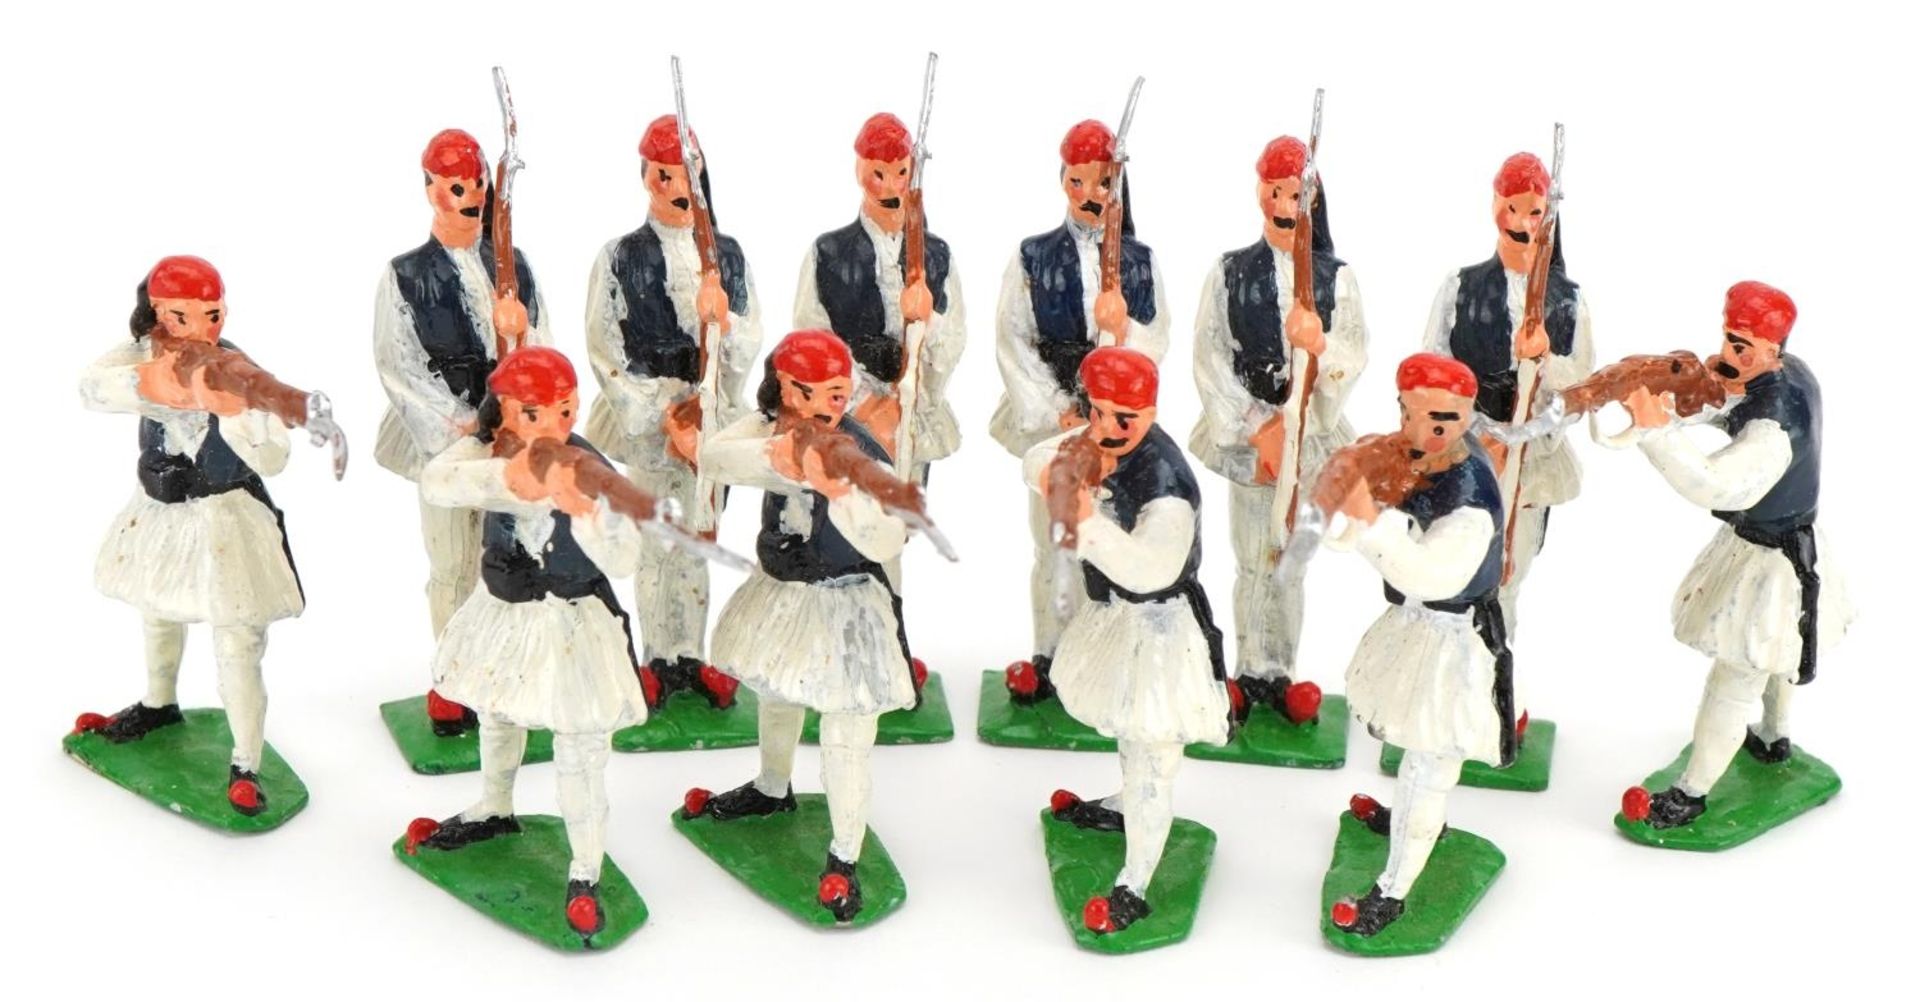 Twelve hand painted lead model soldiers, the largest 6cm high